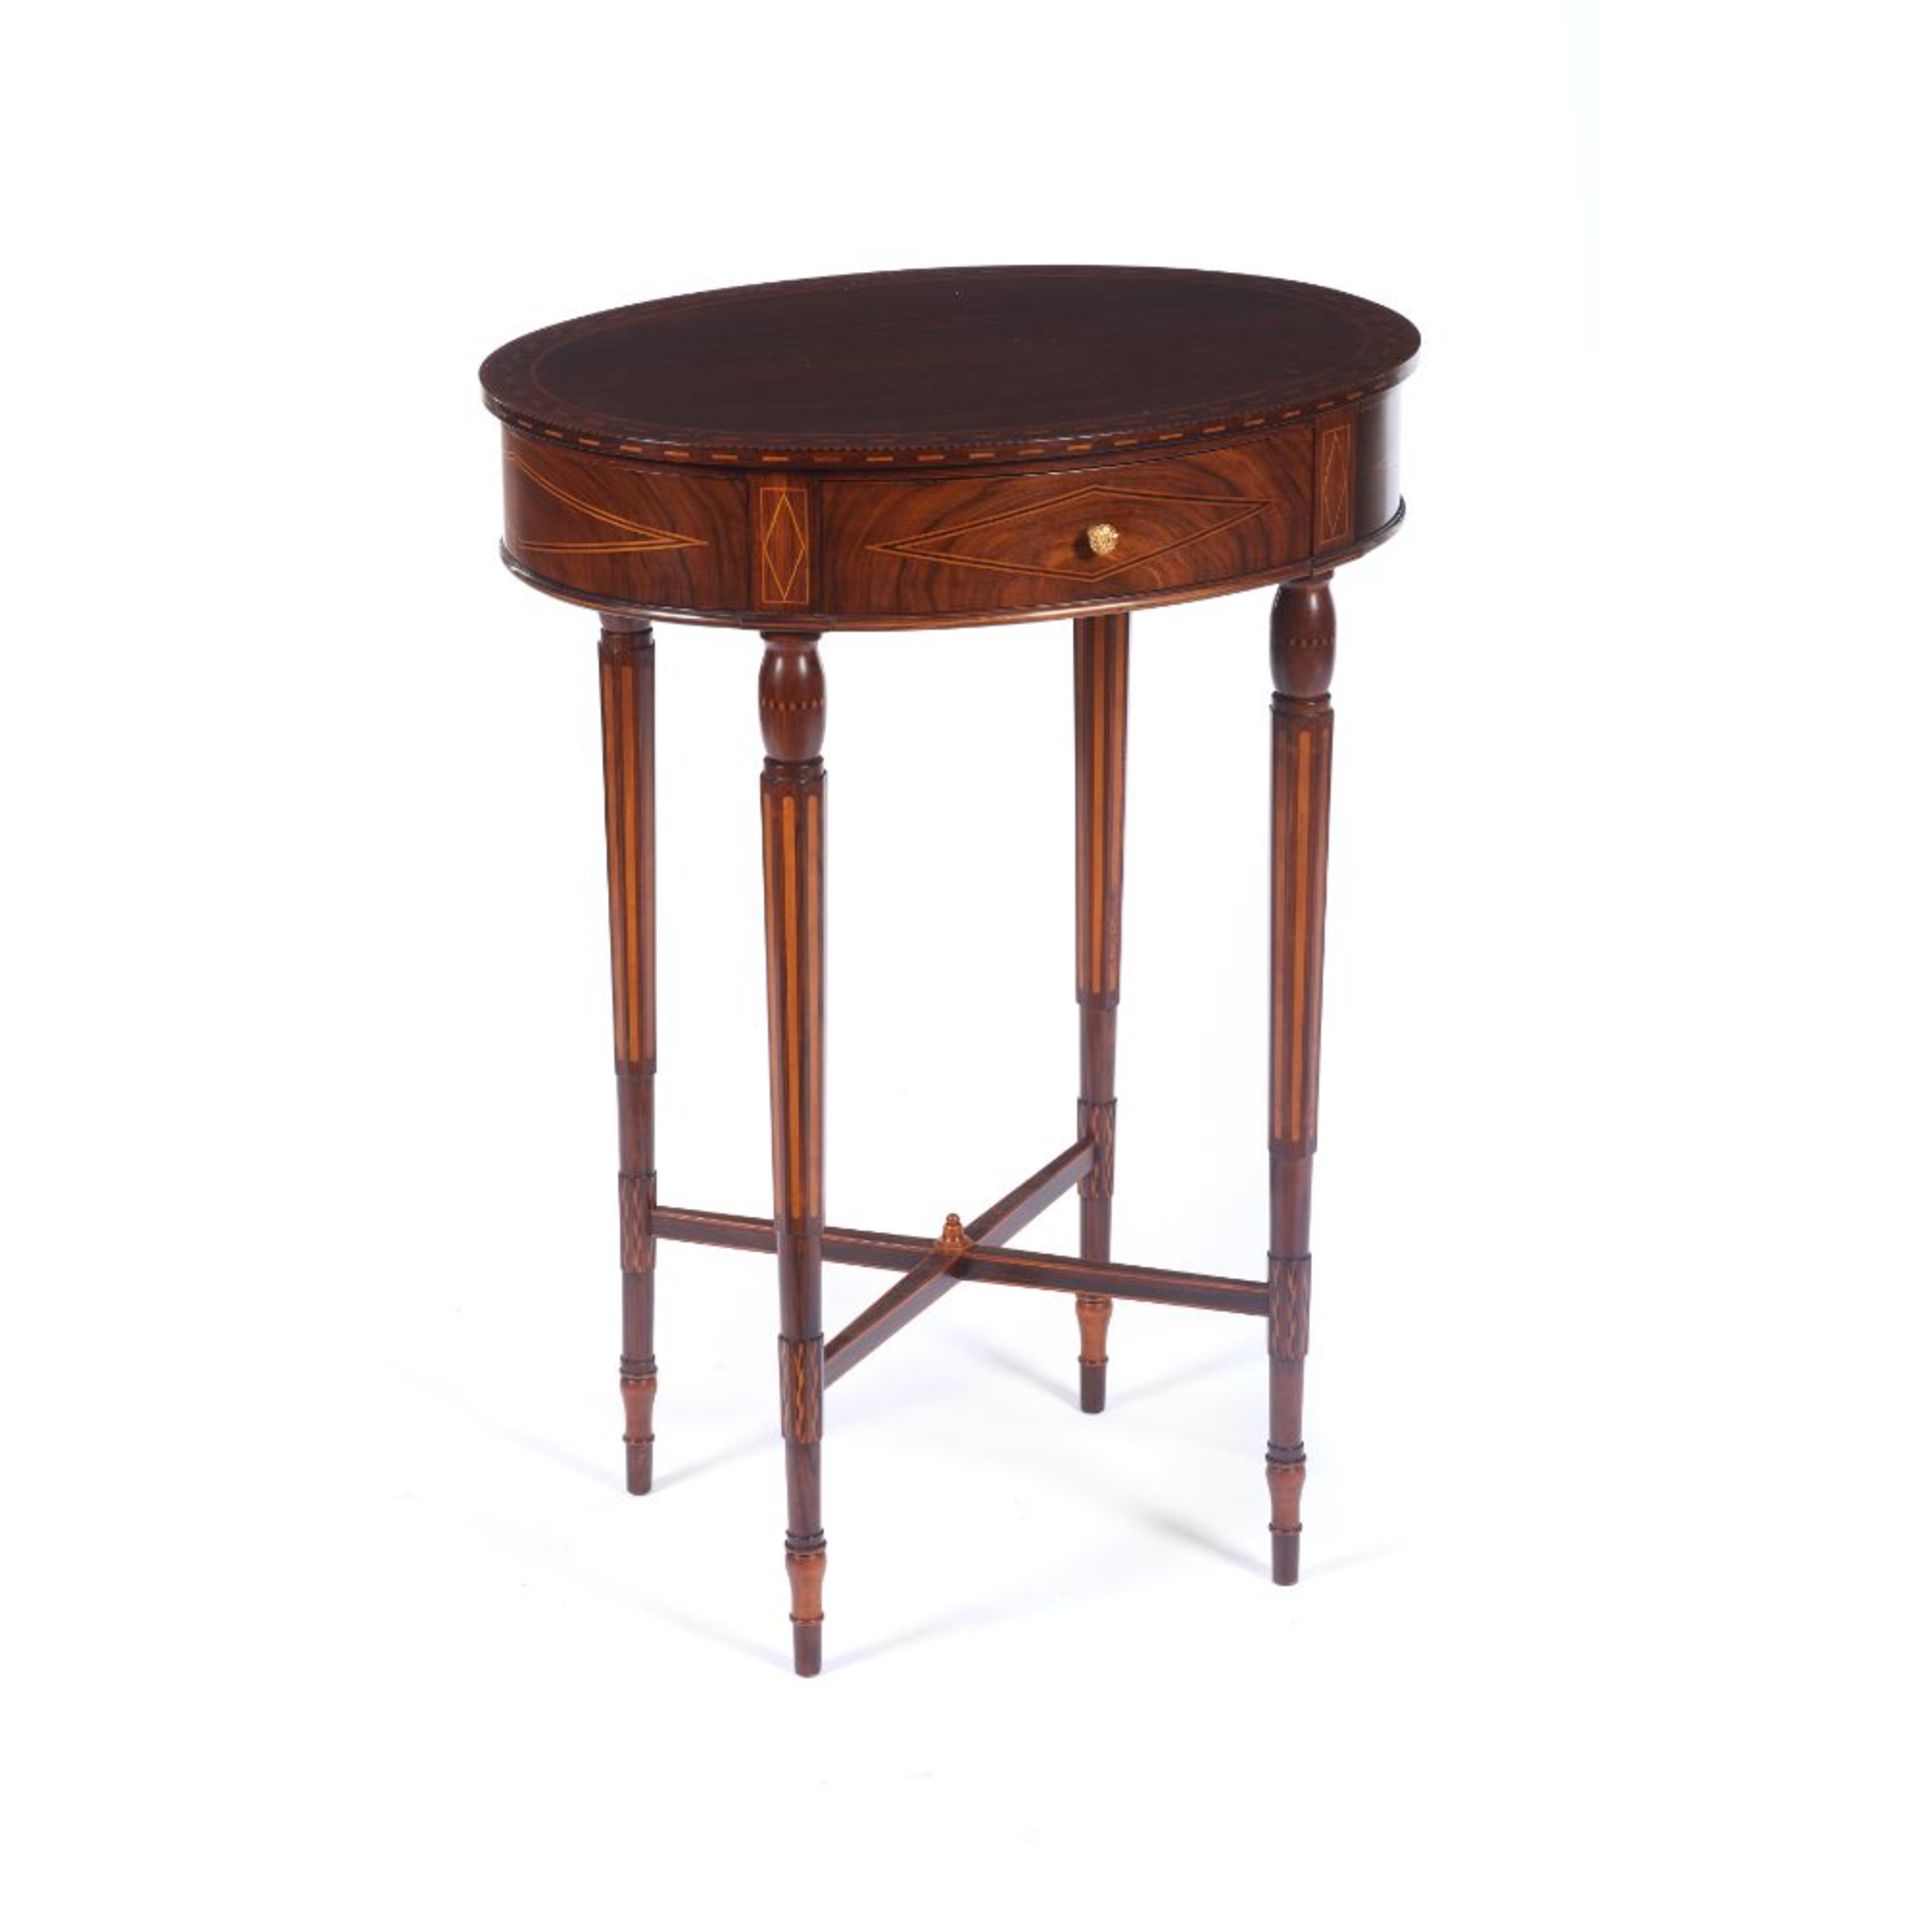 An oval D.Maria style table, Rosewood of rosewood and satinwood marquetry decoration, Three